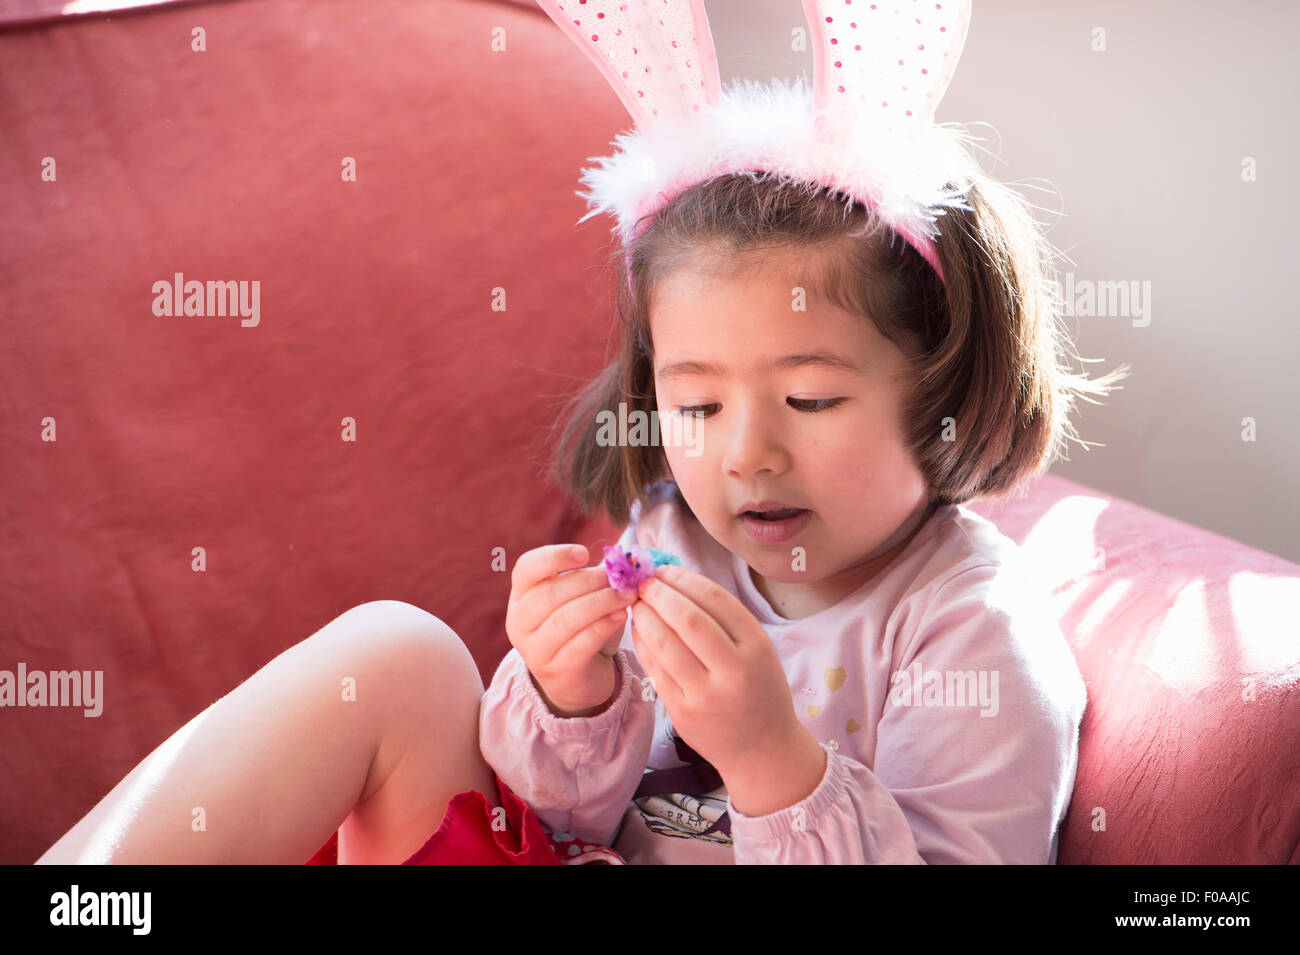 Young girl wearing bunny ears, looking at fluffy Easter chick Stock Photo